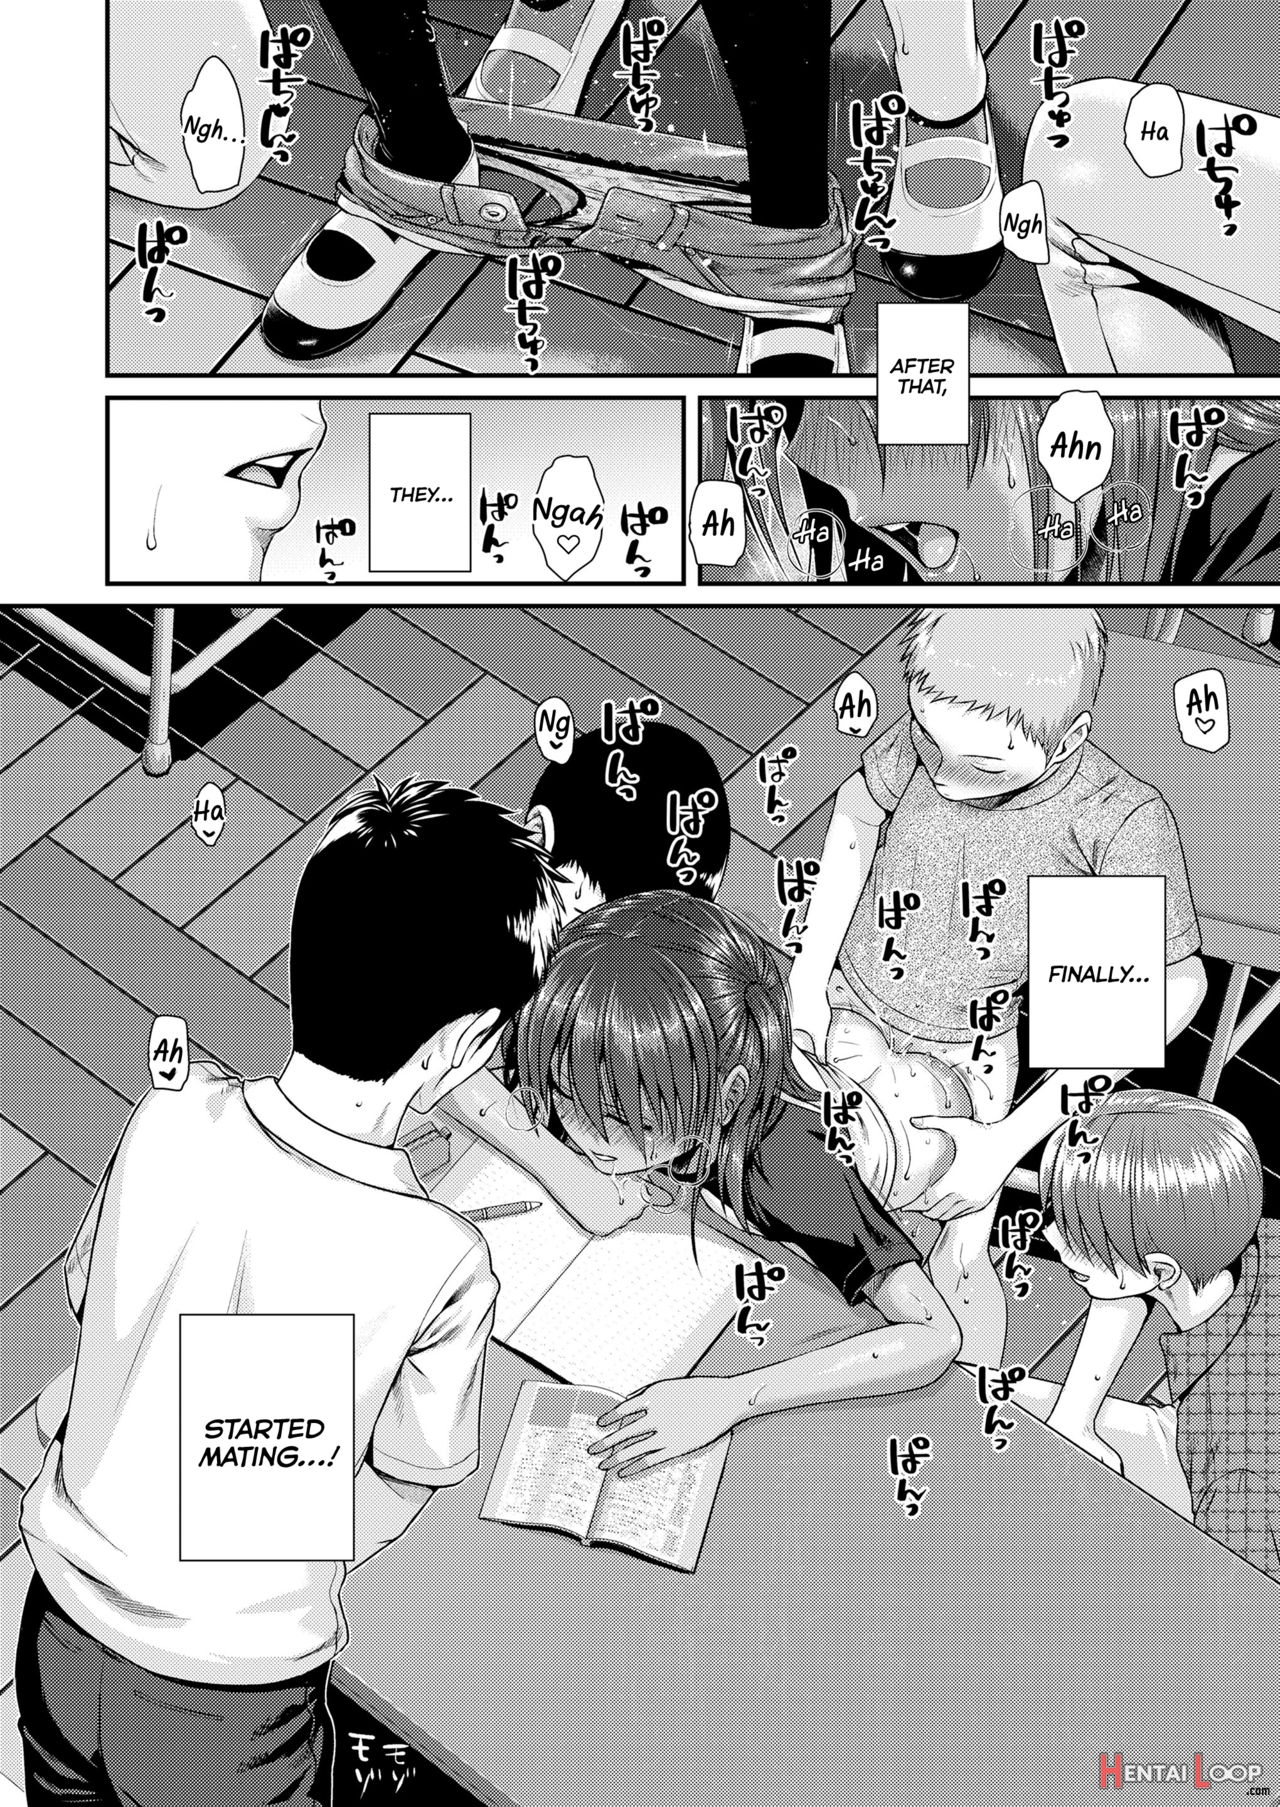 Together With Everyone After School page 22